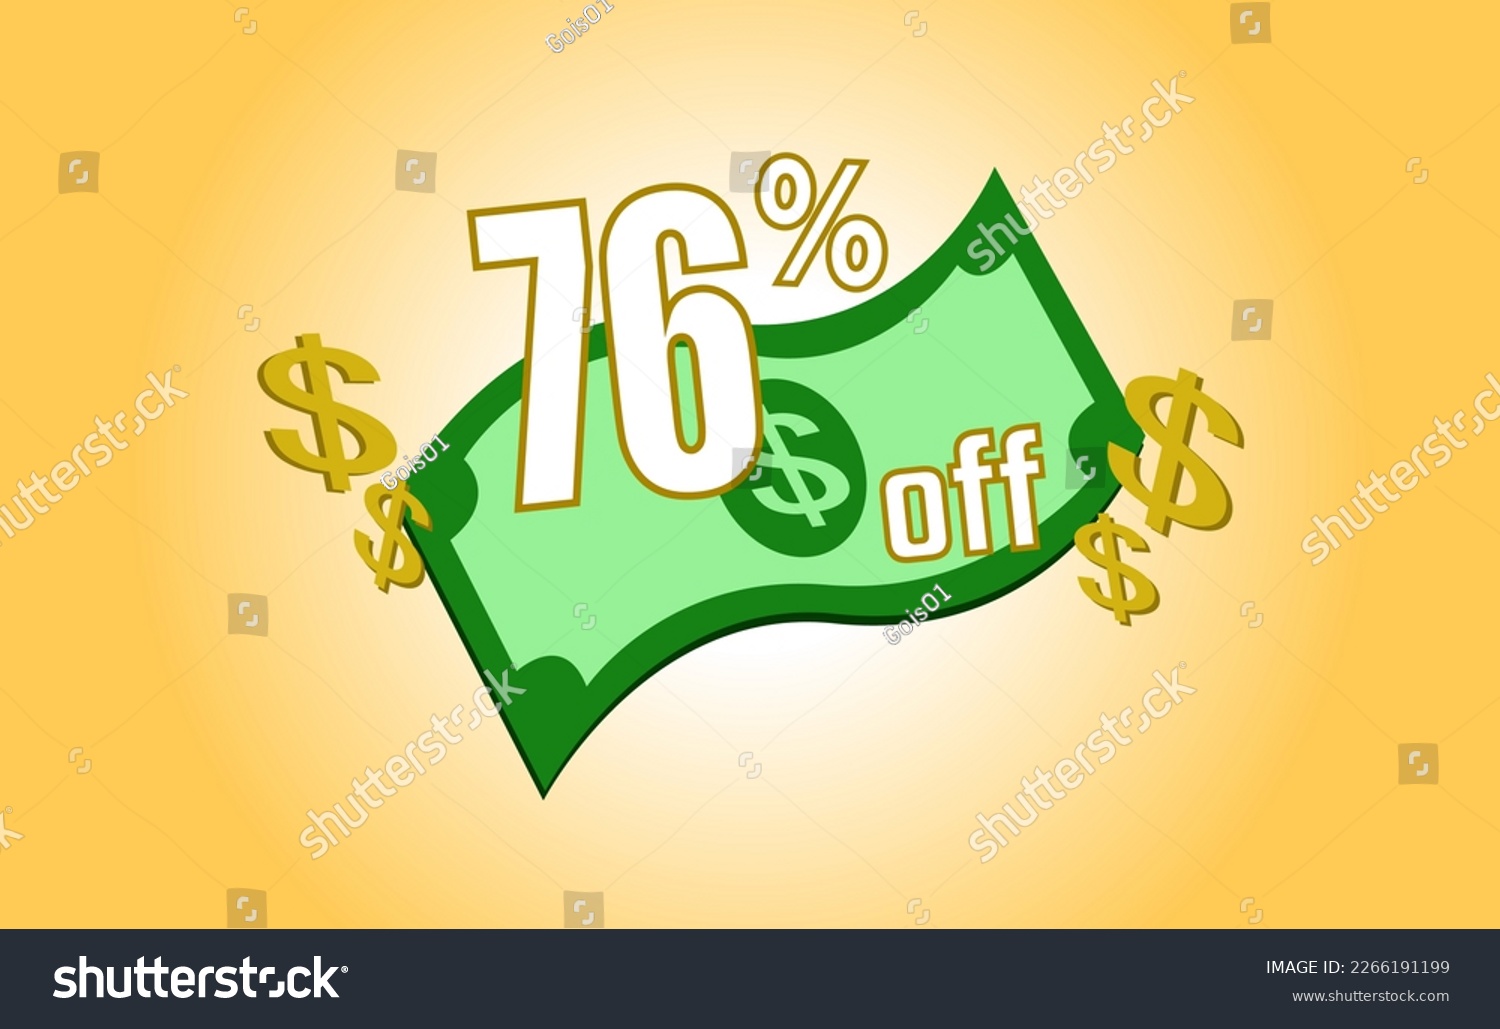 SVG of 76 percent off. Banner with banknote and dollar sign svg